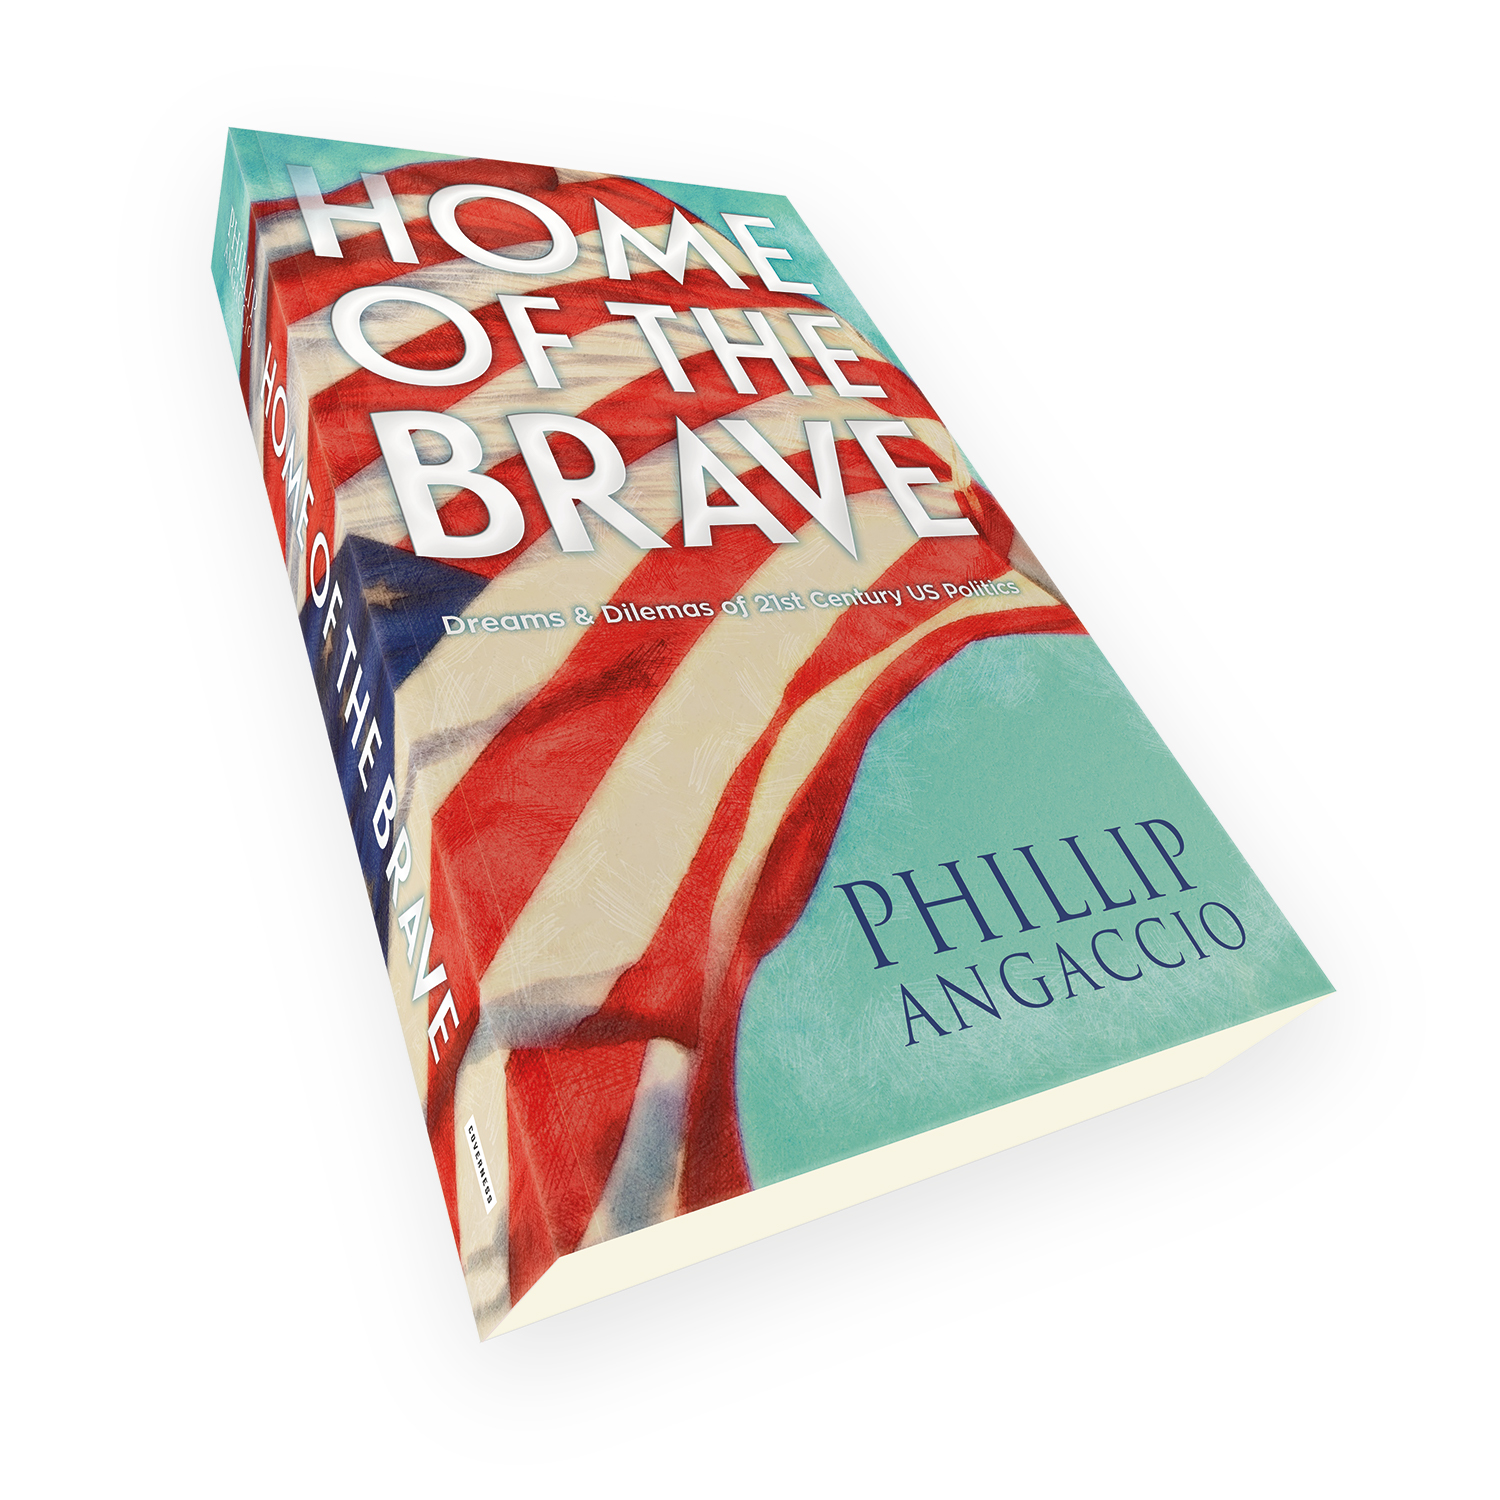 'Home of the Brave' is a bespoke cover design for a modern politically-themed book. The book cover was designed by Mark Thomas, of coverness.com. To find out more about my book design services, please visit www.coverness.com.